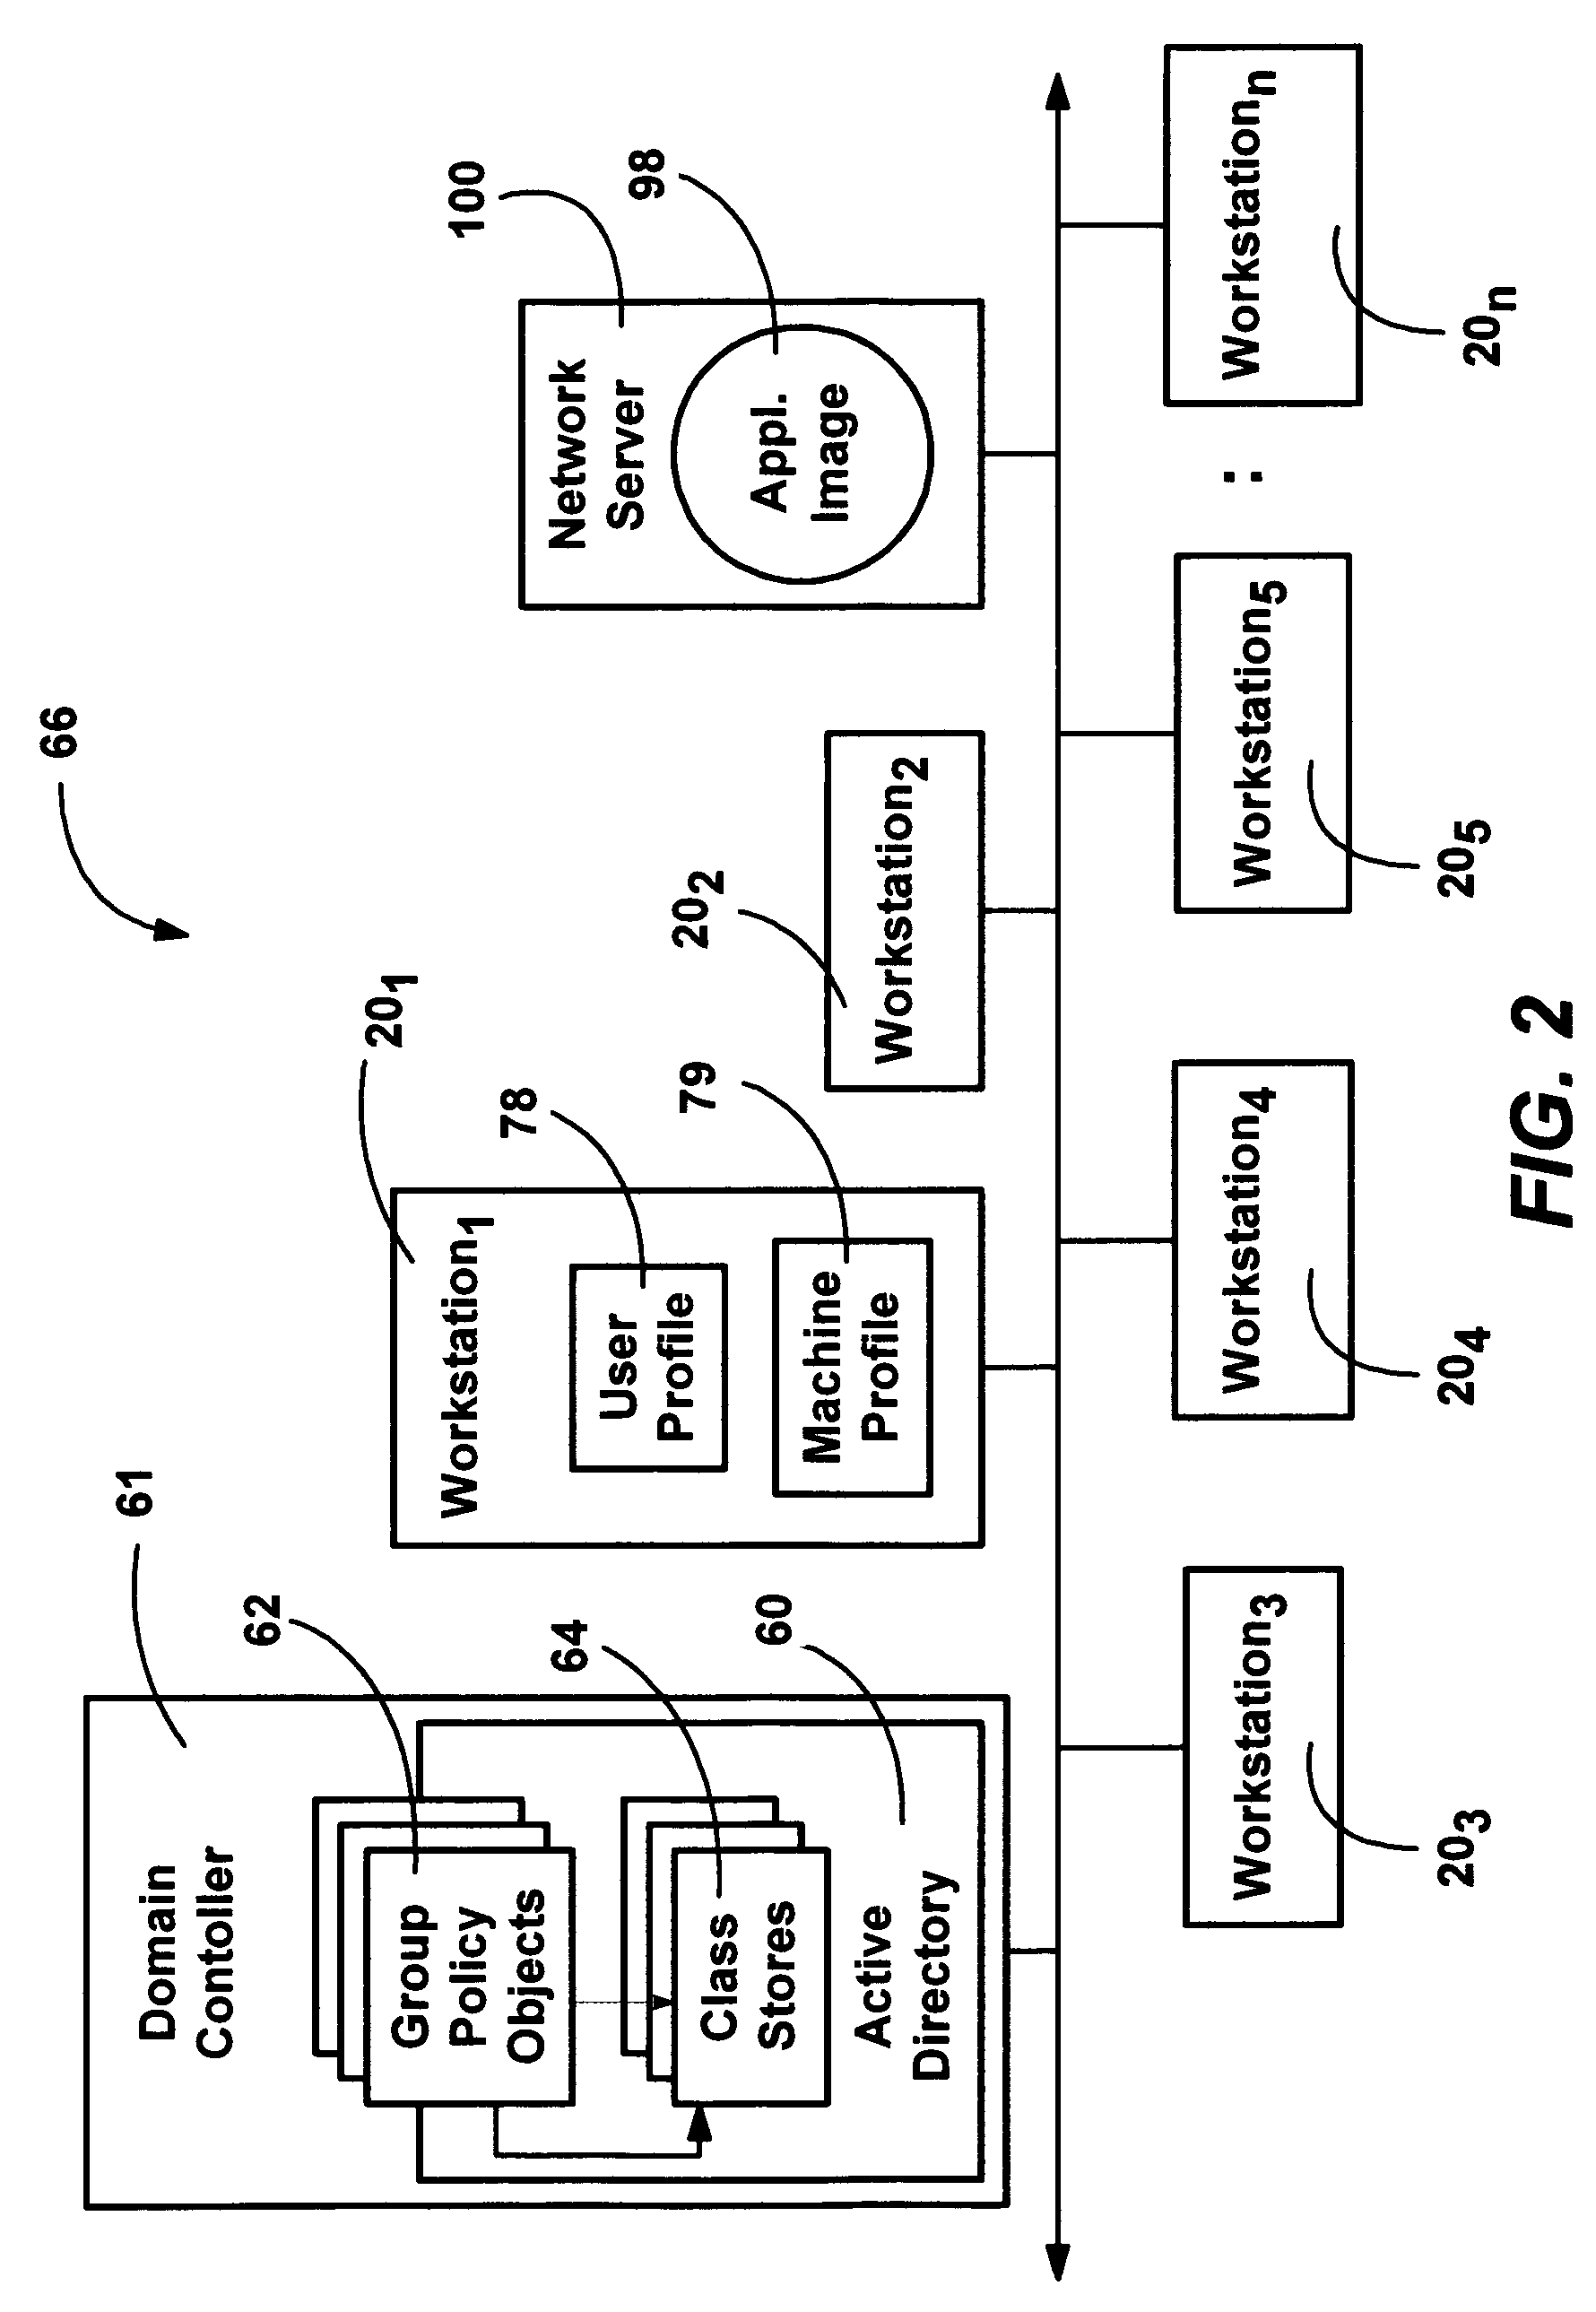 Method and system for managing lifecycles of deployed applications